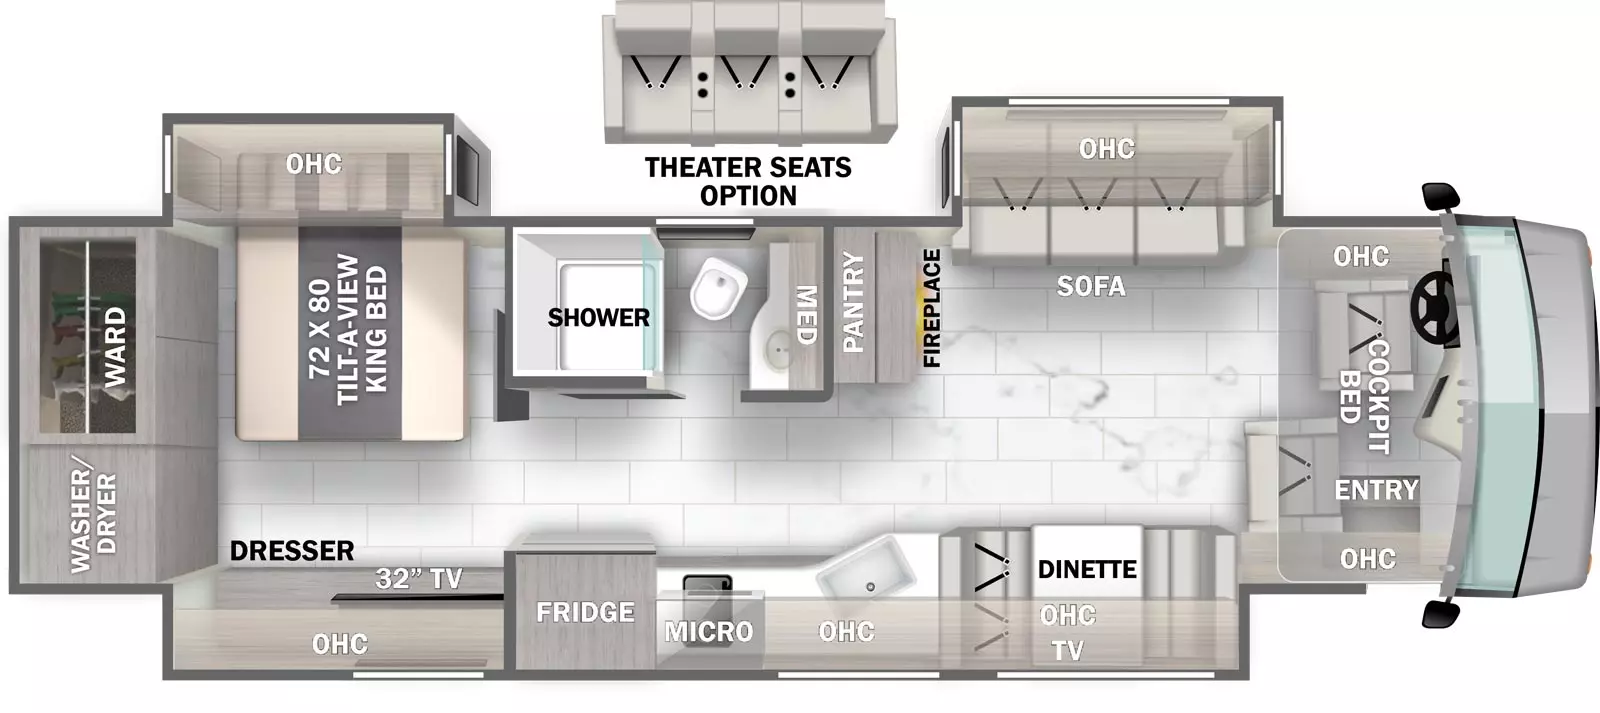 The 34B has 3 slide outs and one entry door. Interior layout front to back: cockpit with entry door, overhead cabinets and cockpit bed; off-door side slideout with sofa and overhead cabinet; door side slideout with dinette, overhead cabinet, TV, kitchen counter with sink, microwave above cooktop, refrigerator, and bedroom dresser with overhead cabinet and TV; off-door side pantry and fireplace on inner wall and side aisle full bathroom; rear off-door side tilt-a-view king bed slideout with overhead cabinet; rear wardrobe and closet with washer/dryer prep. Optional heater seats in place of sofa.